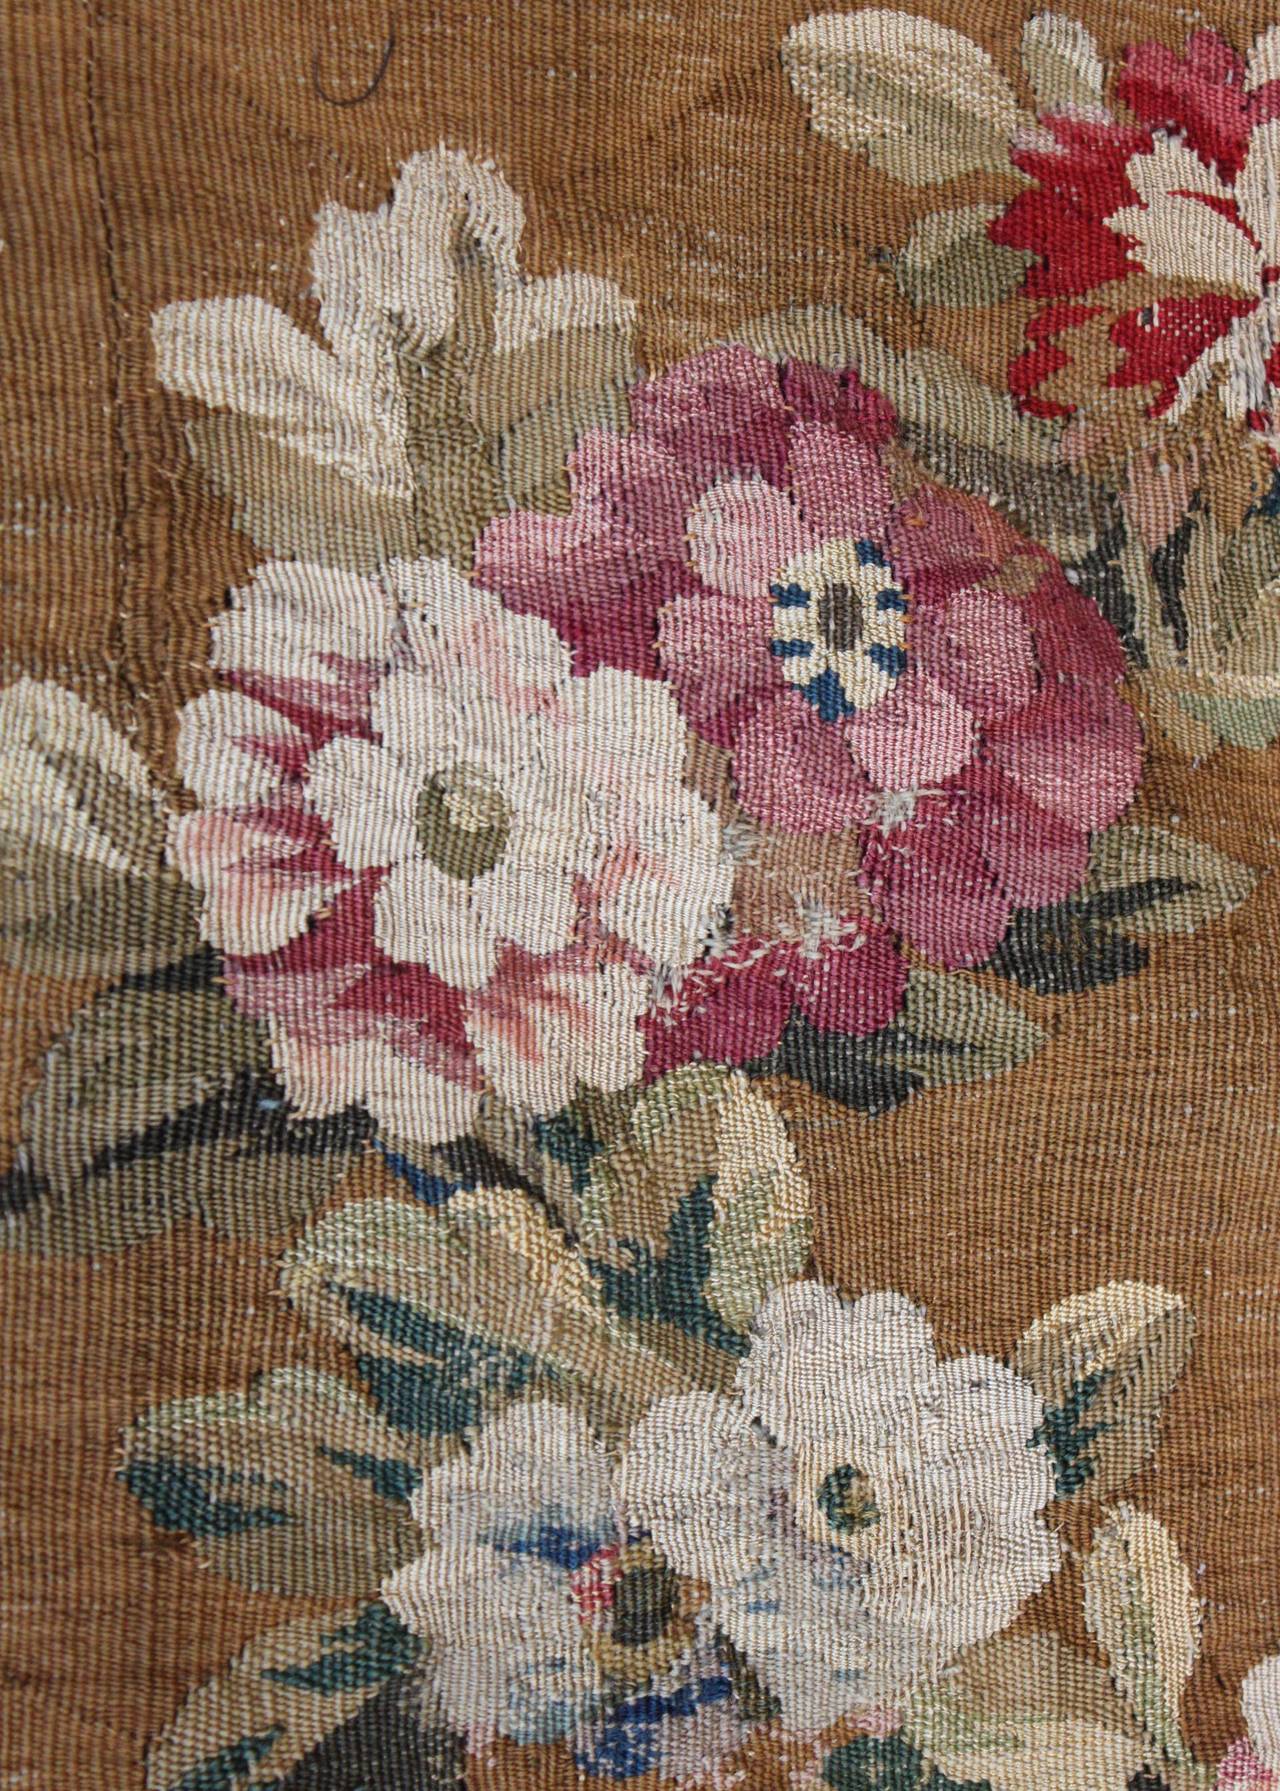 Aubusson French Tapestry For Sale 4